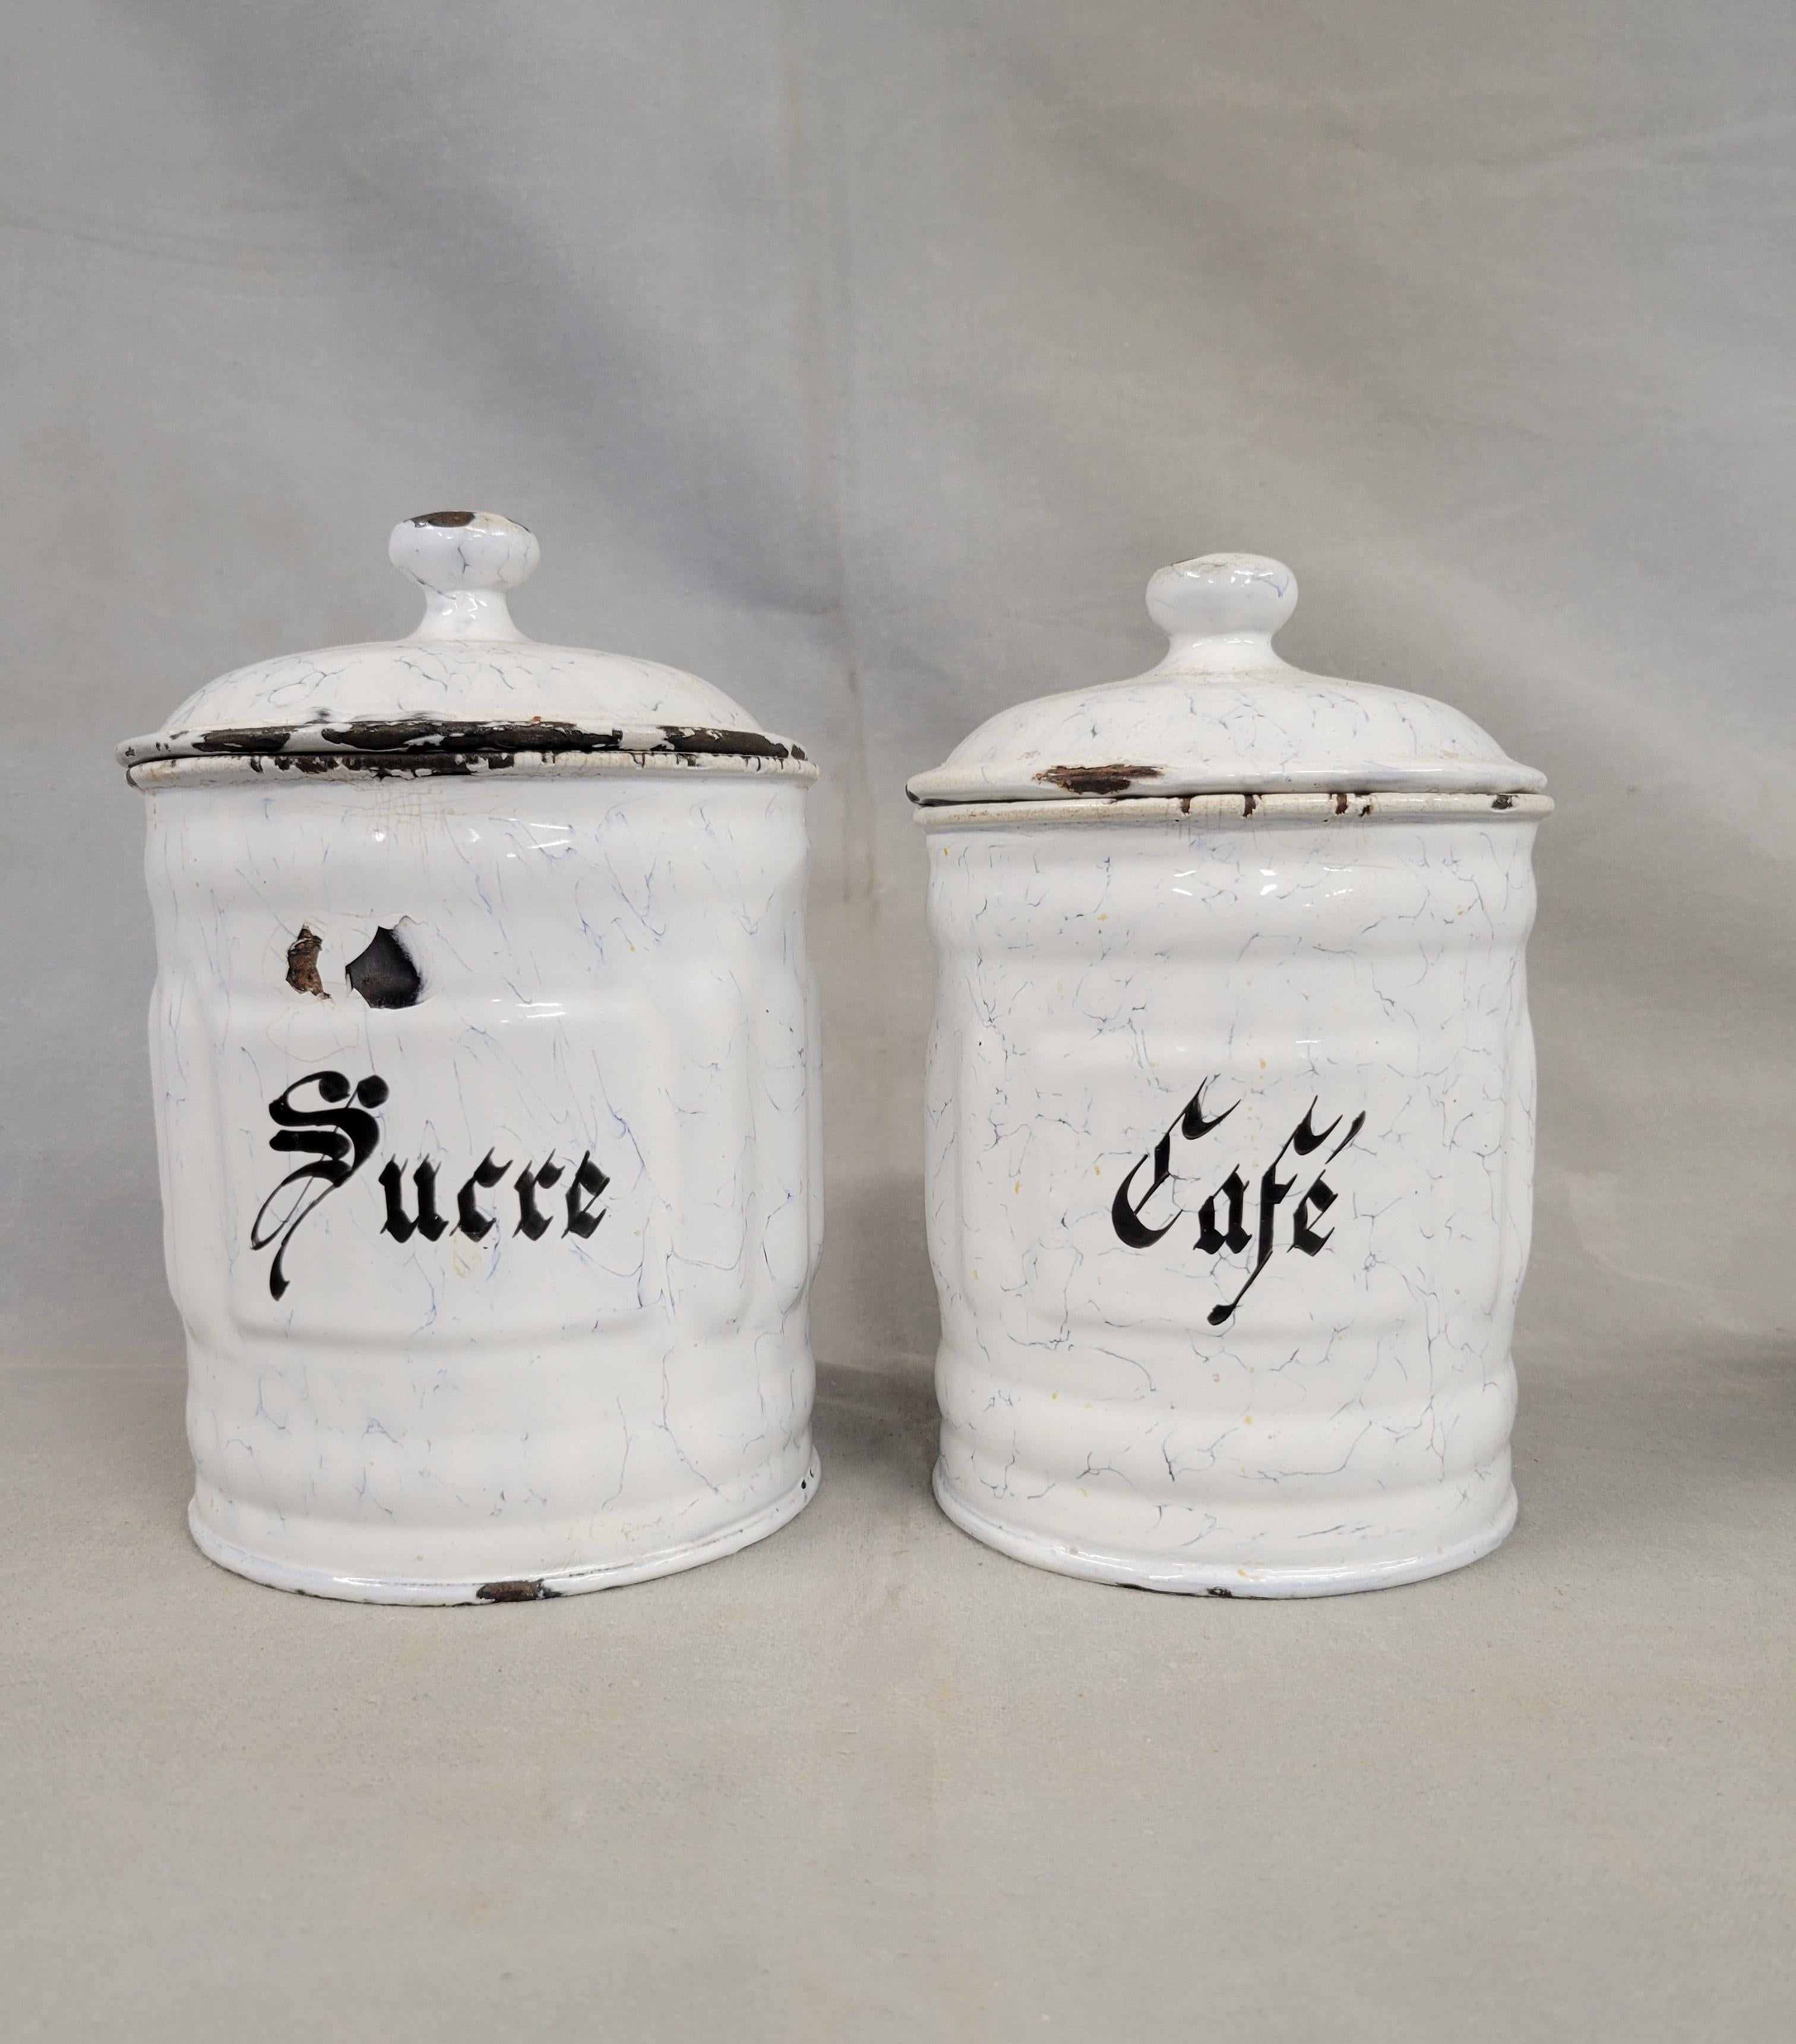 French Provincial Antique French White and Blue Enamel Canister Set - 6 Pieces For Sale